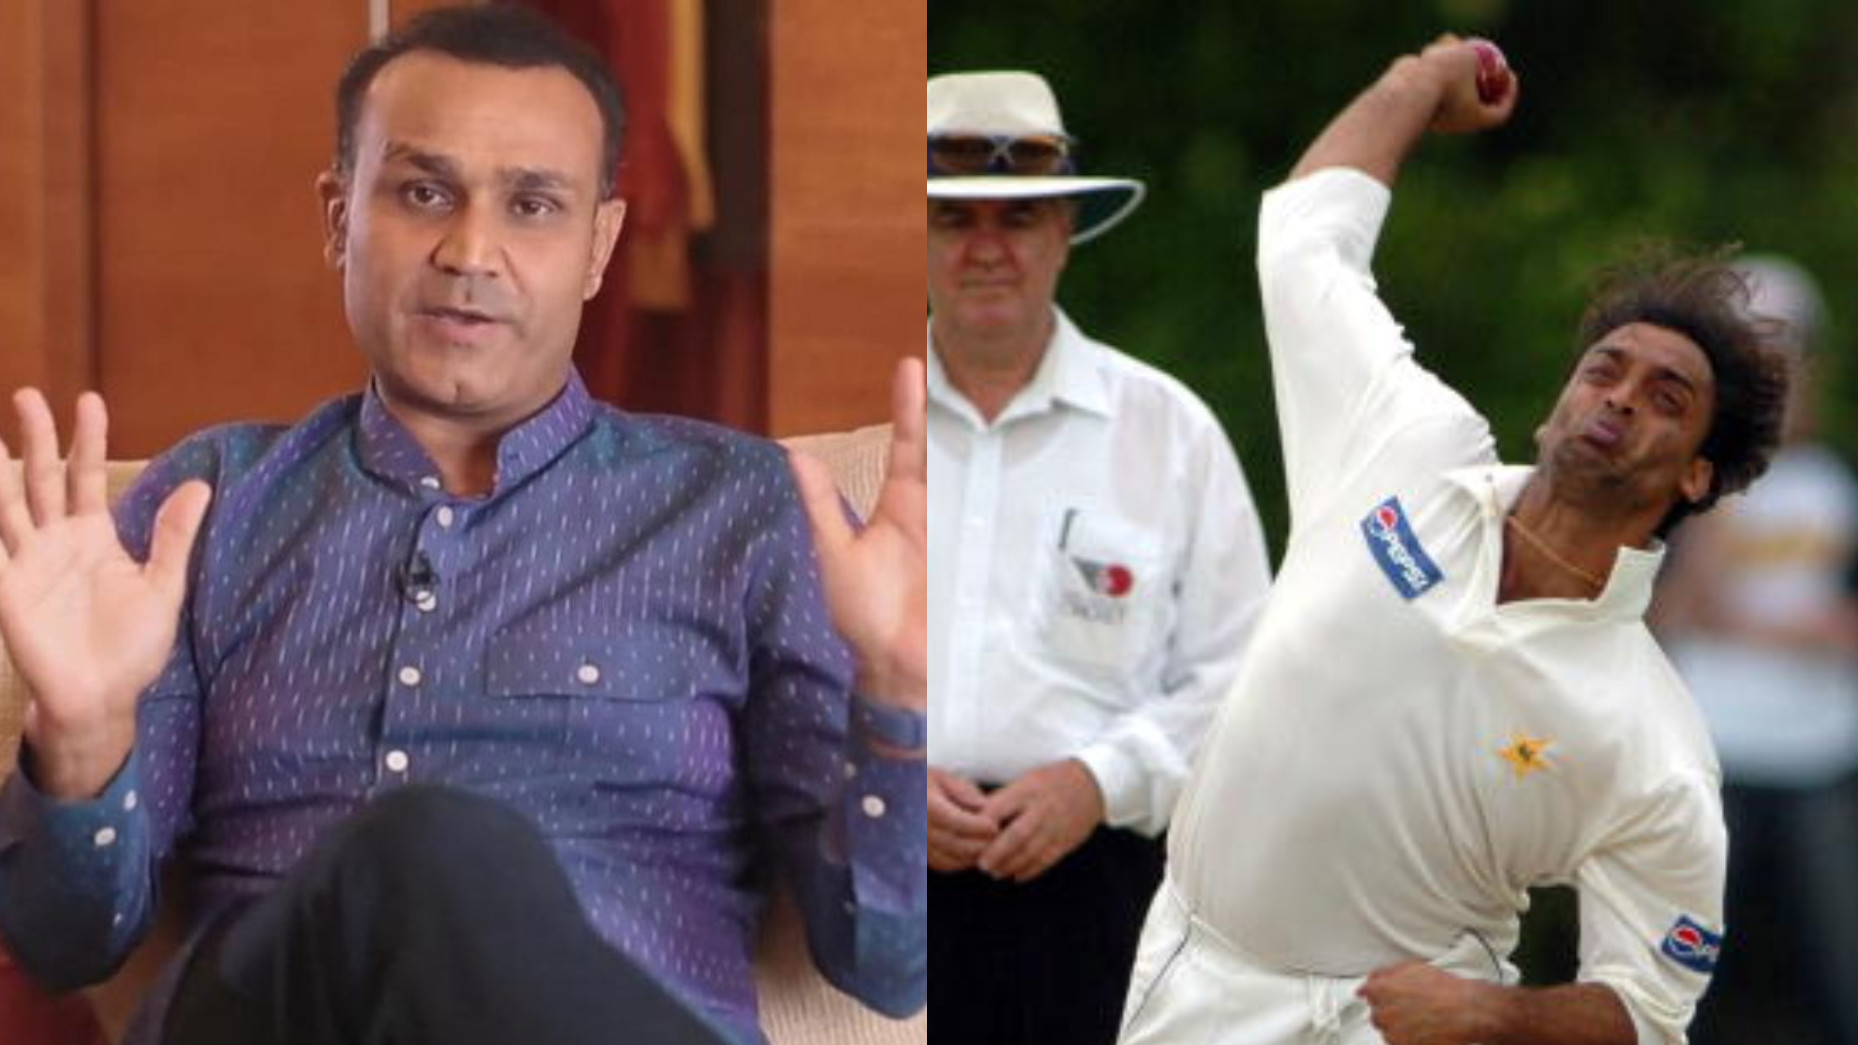 Shoaib Akhtar knew he was chucking when he used to bowl, says Virender Sehwag